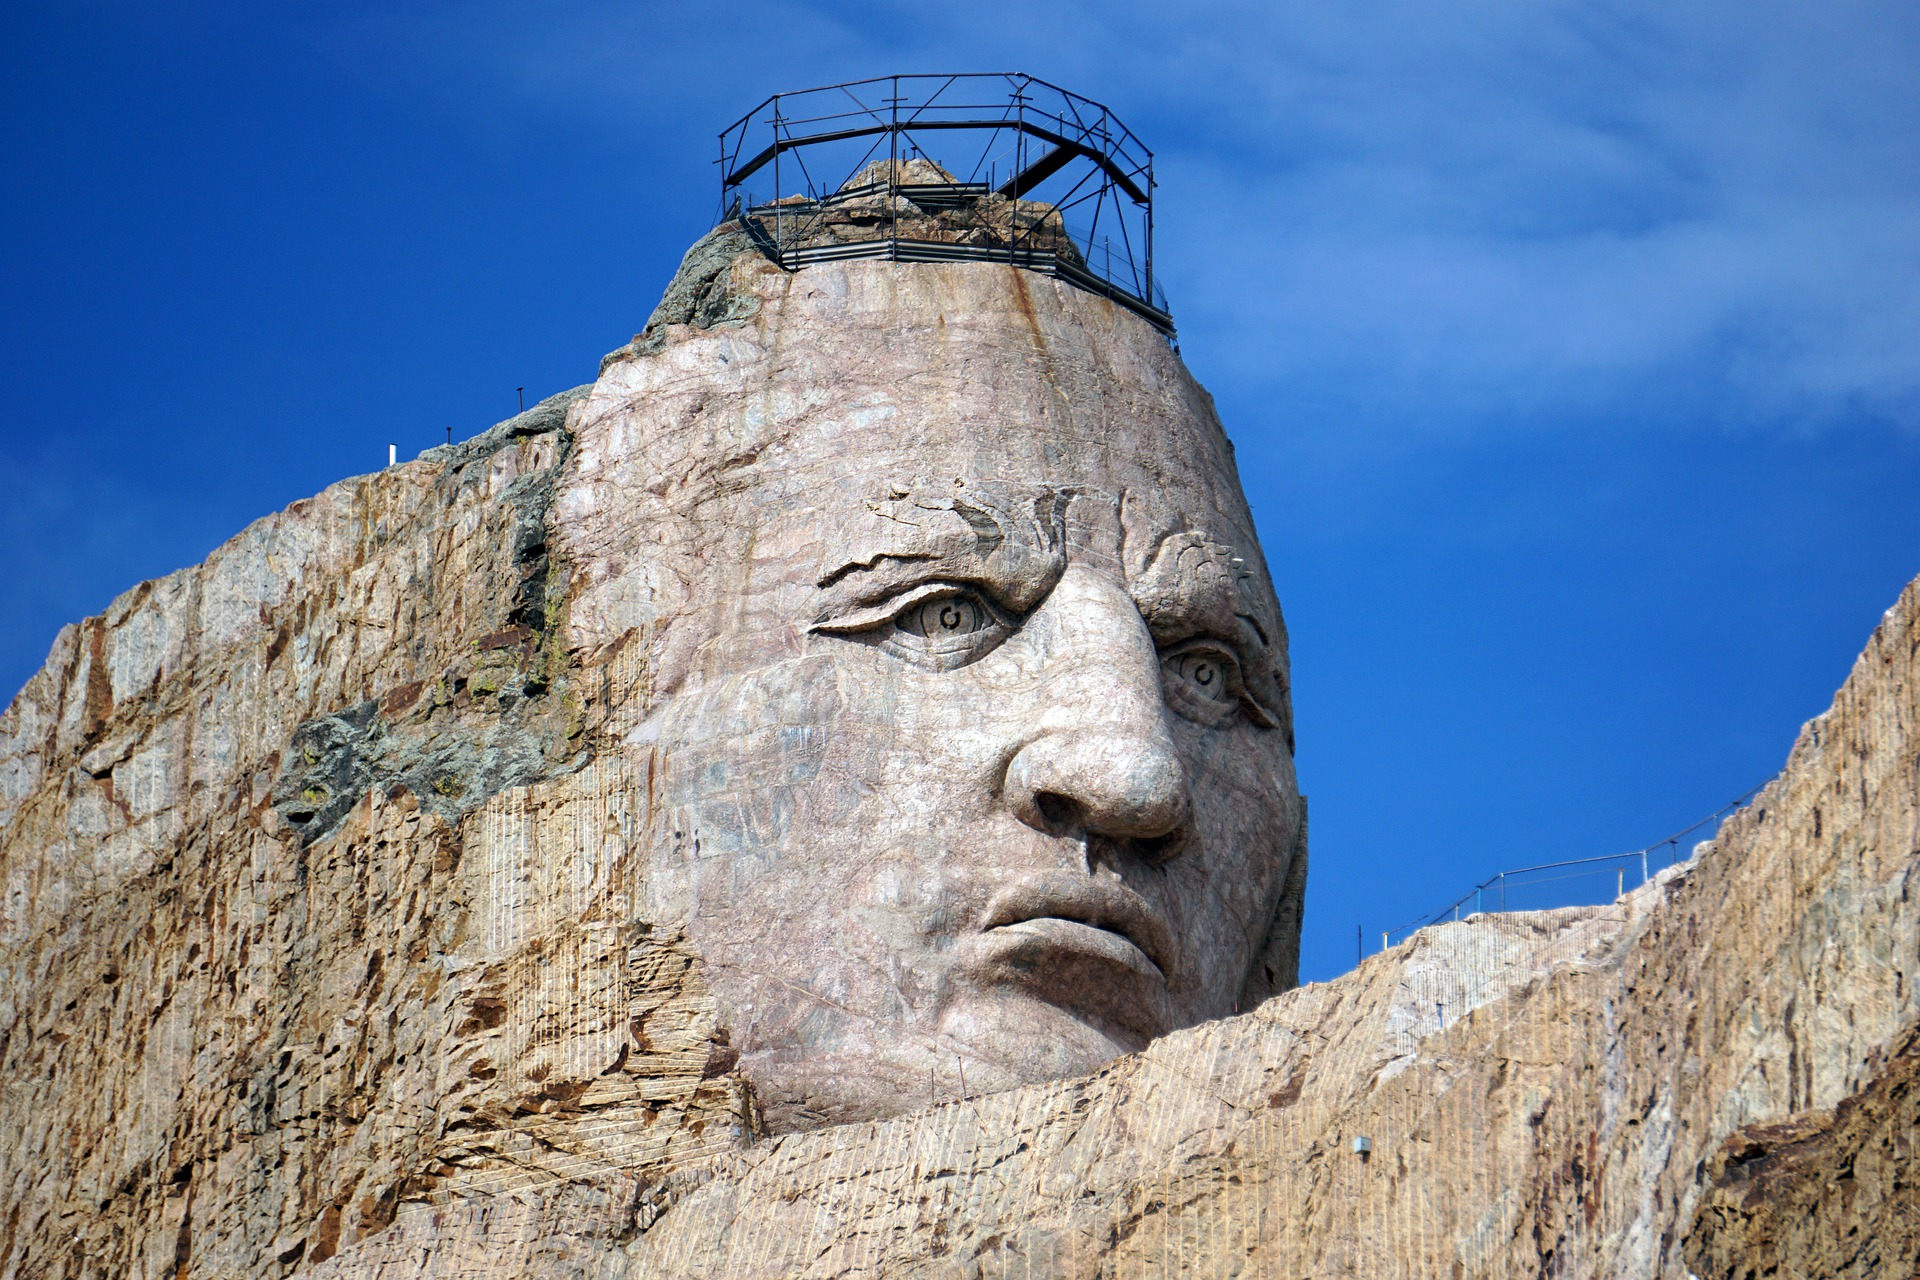 Crazy Horse is the world's largest mountain carving located in the Black Hills of South Dakota.